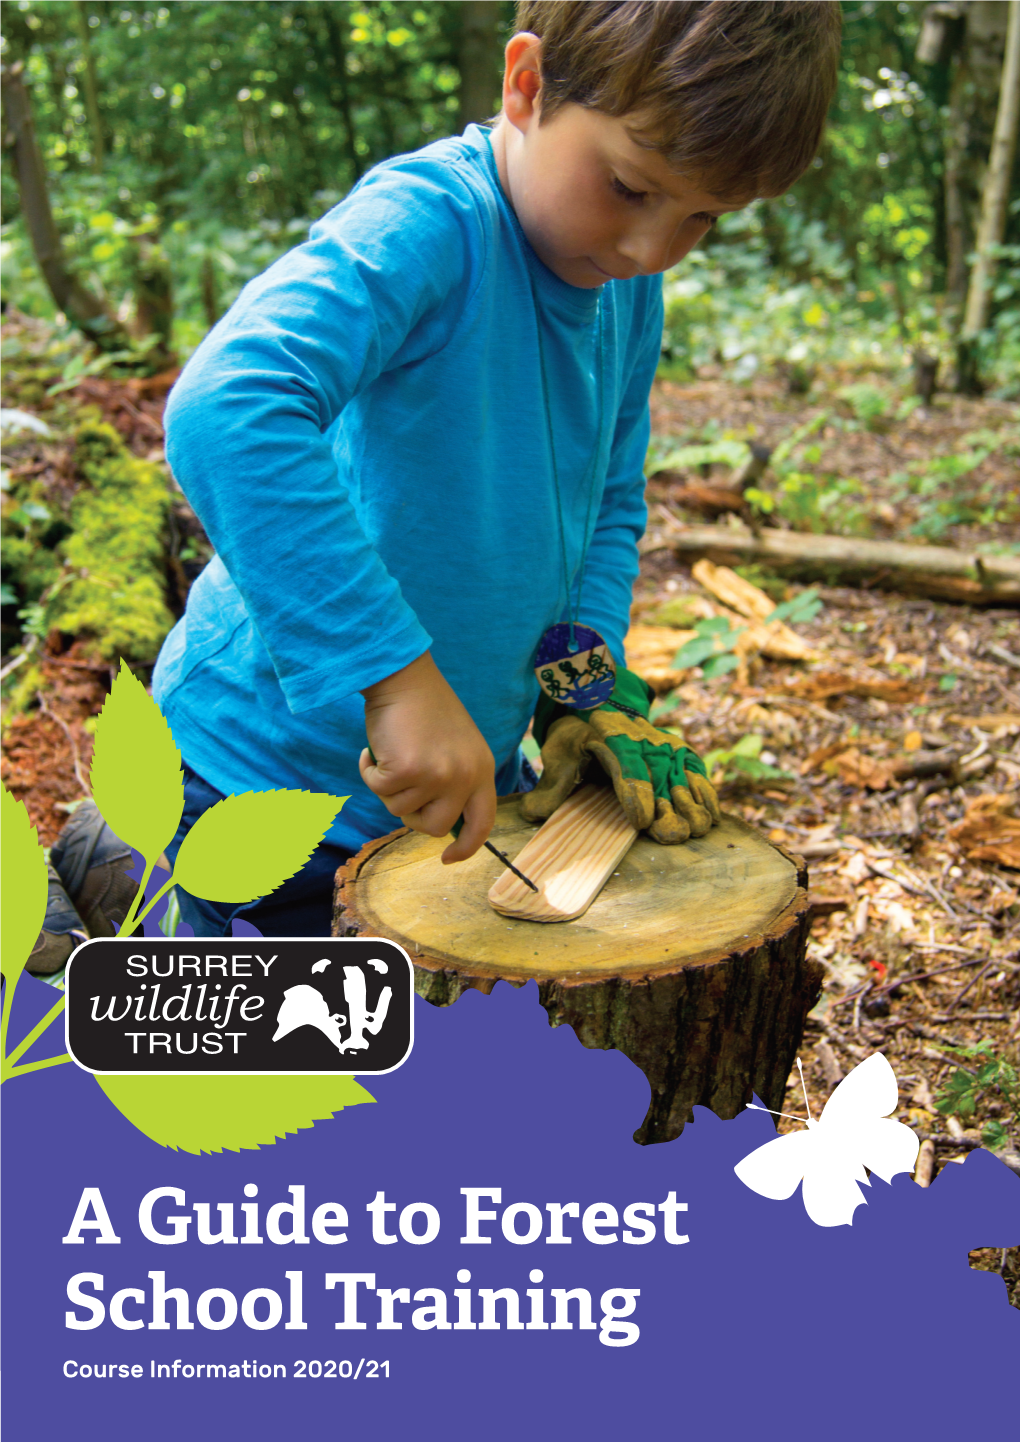 A Guide to Forest School Training